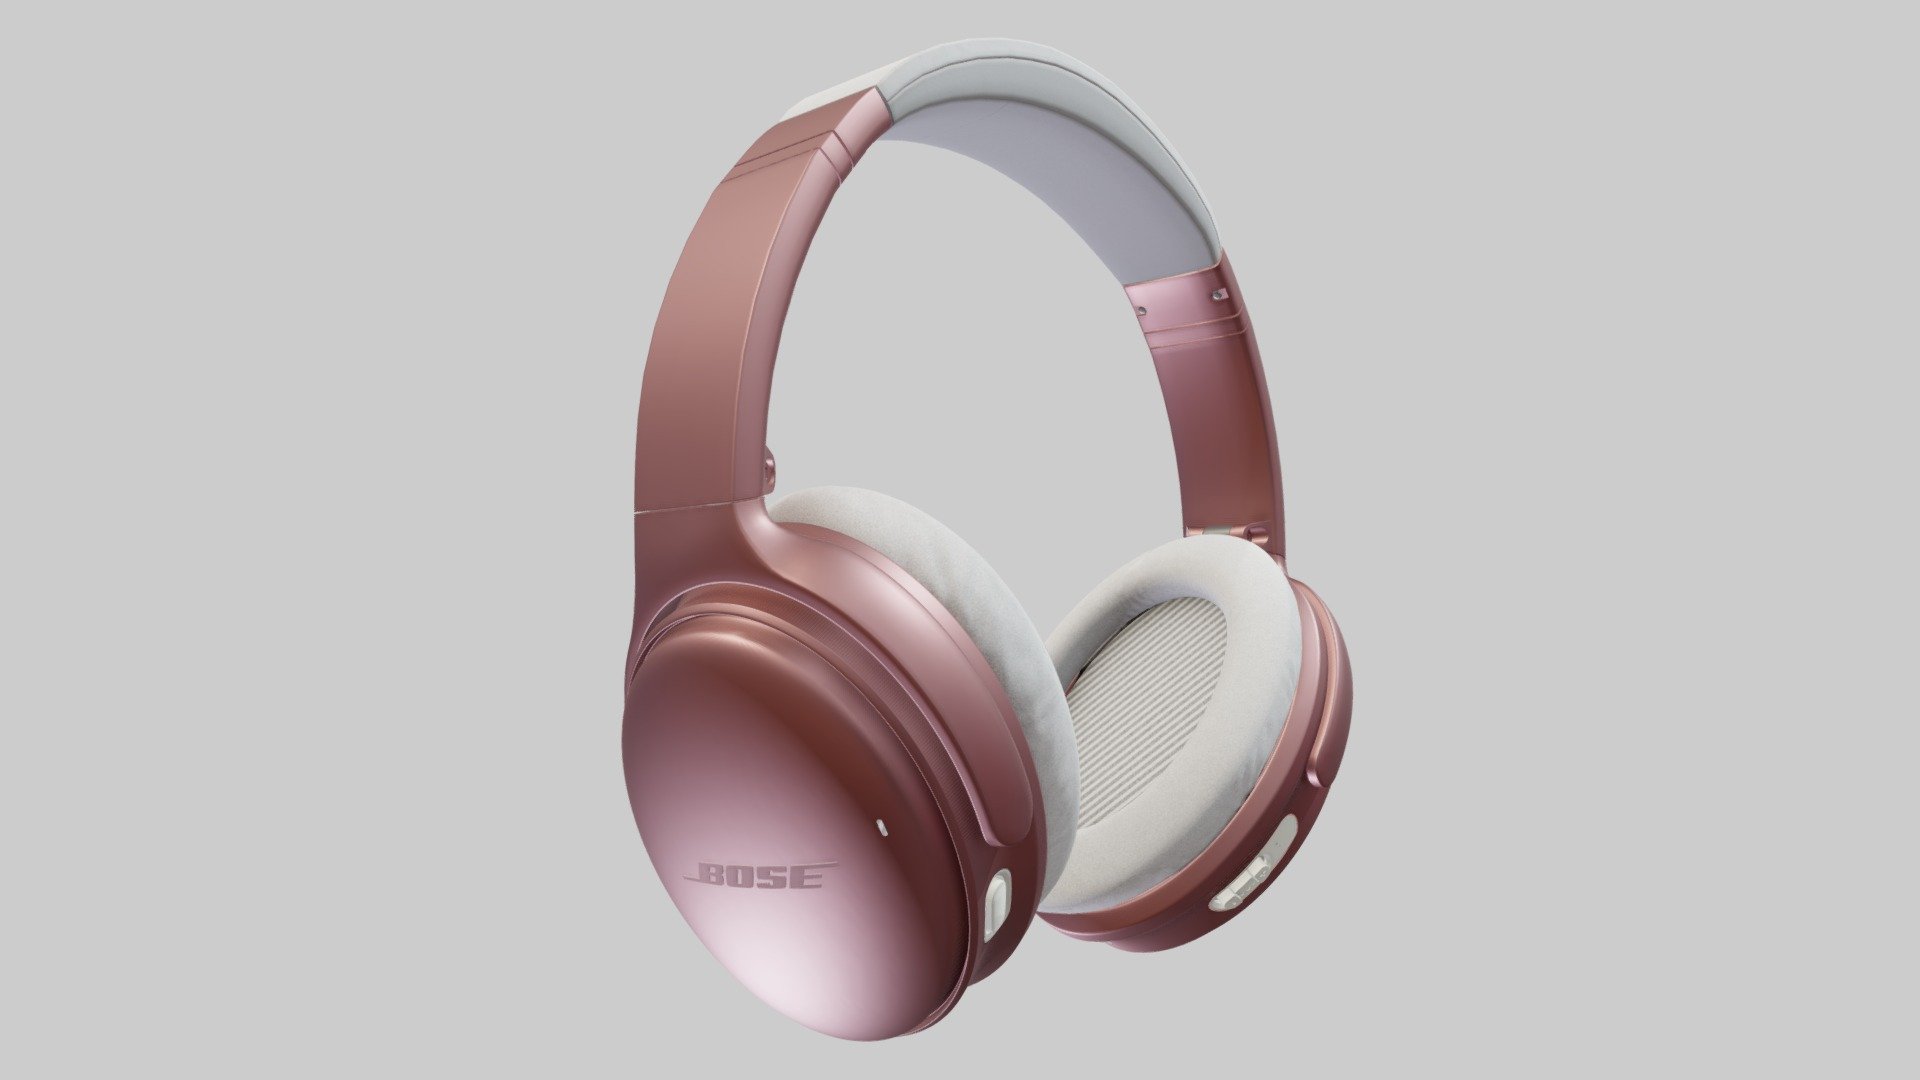 Bose QuietComfort 35 wireless headphone 
* High-poly model with all surface details included
* Scaled to real world dimensions , units in cm

Optimised for character design or offline product rendering works. 
Built with Blender - BOSE QC35 wireless headphone high poly - Download Free 3D model by ChristyHsu (@ida61xq) 3d model